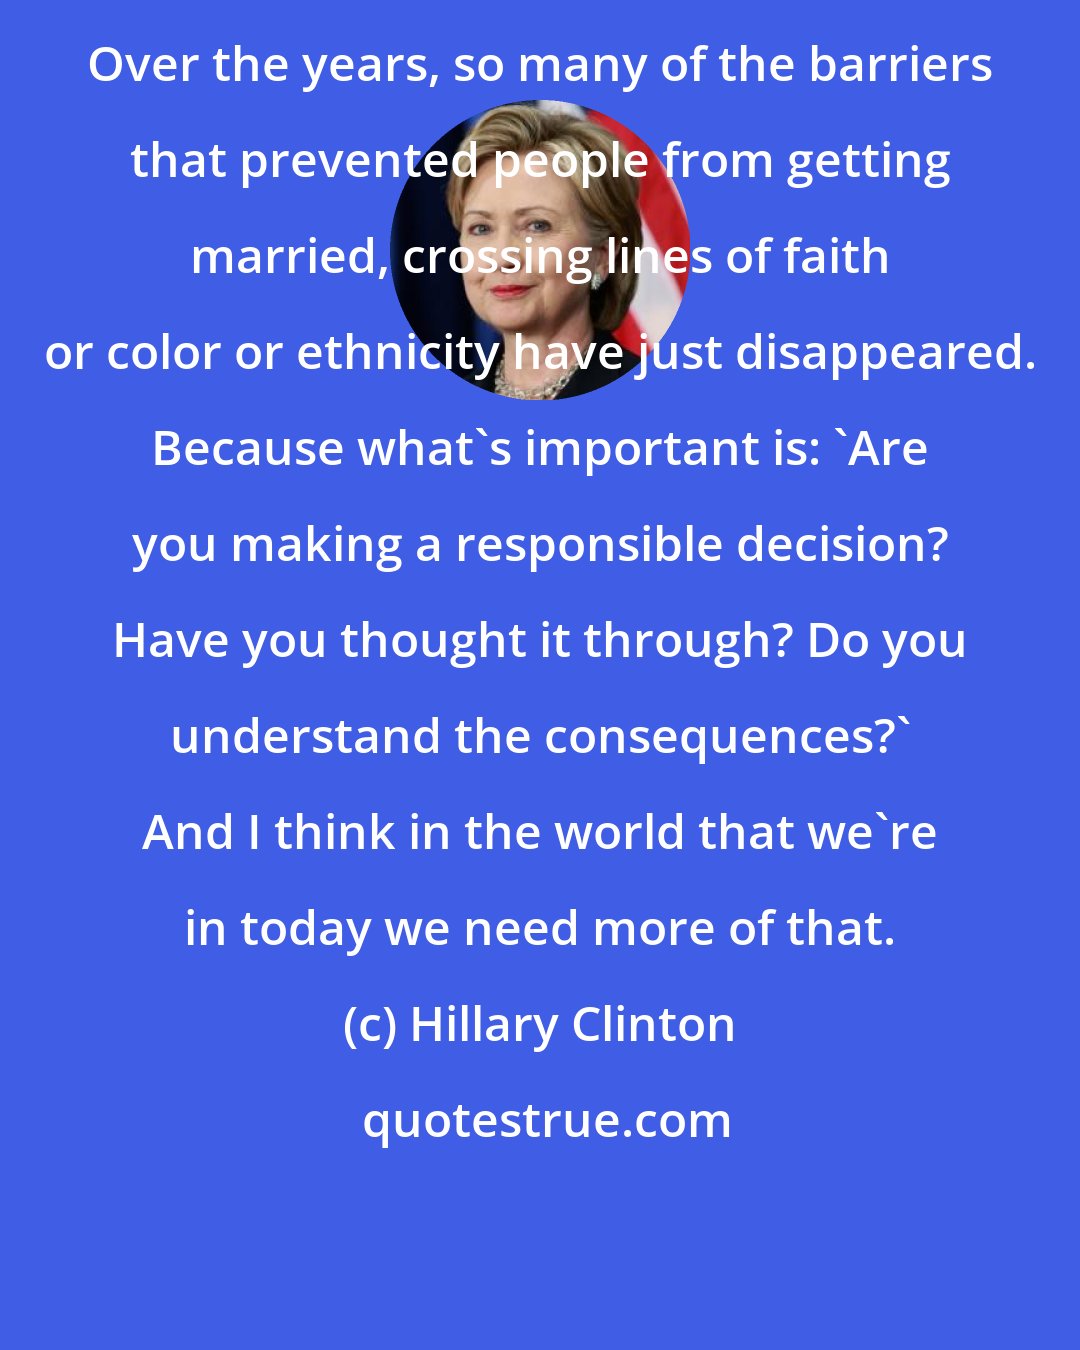 Hillary Clinton: Over the years, so many of the barriers that prevented people from getting married, crossing lines of faith or color or ethnicity have just disappeared. Because what's important is: 'Are you making a responsible decision? Have you thought it through? Do you understand the consequences?' And I think in the world that we're in today we need more of that.